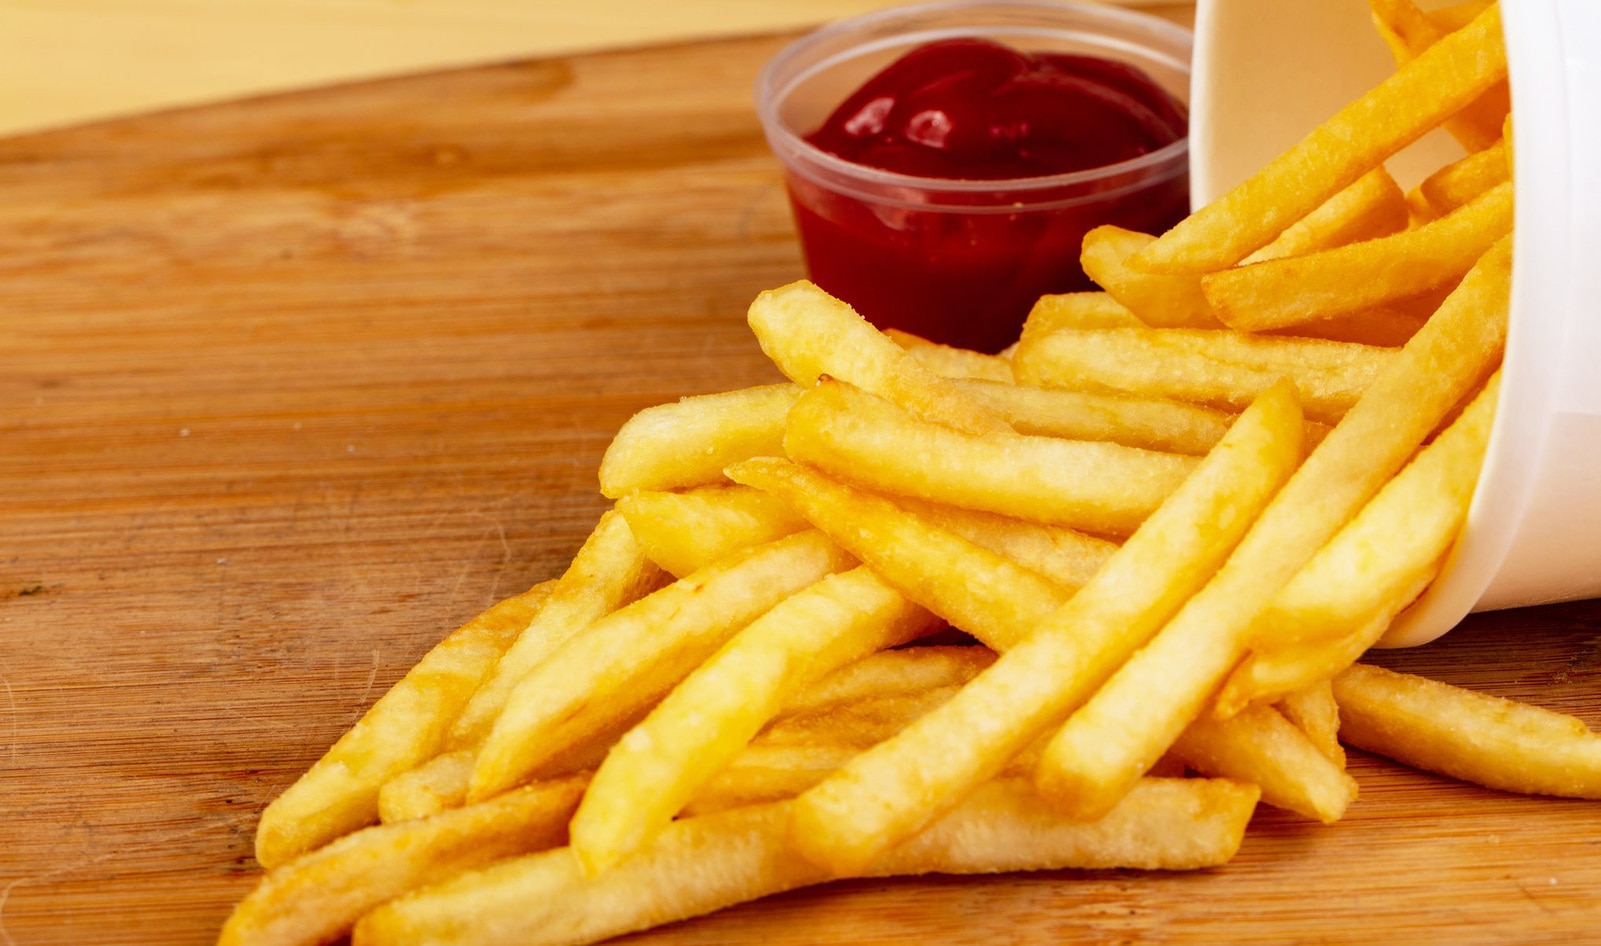 Belgians Urged to Eat French Fries Twice Per Week as Civic Duty